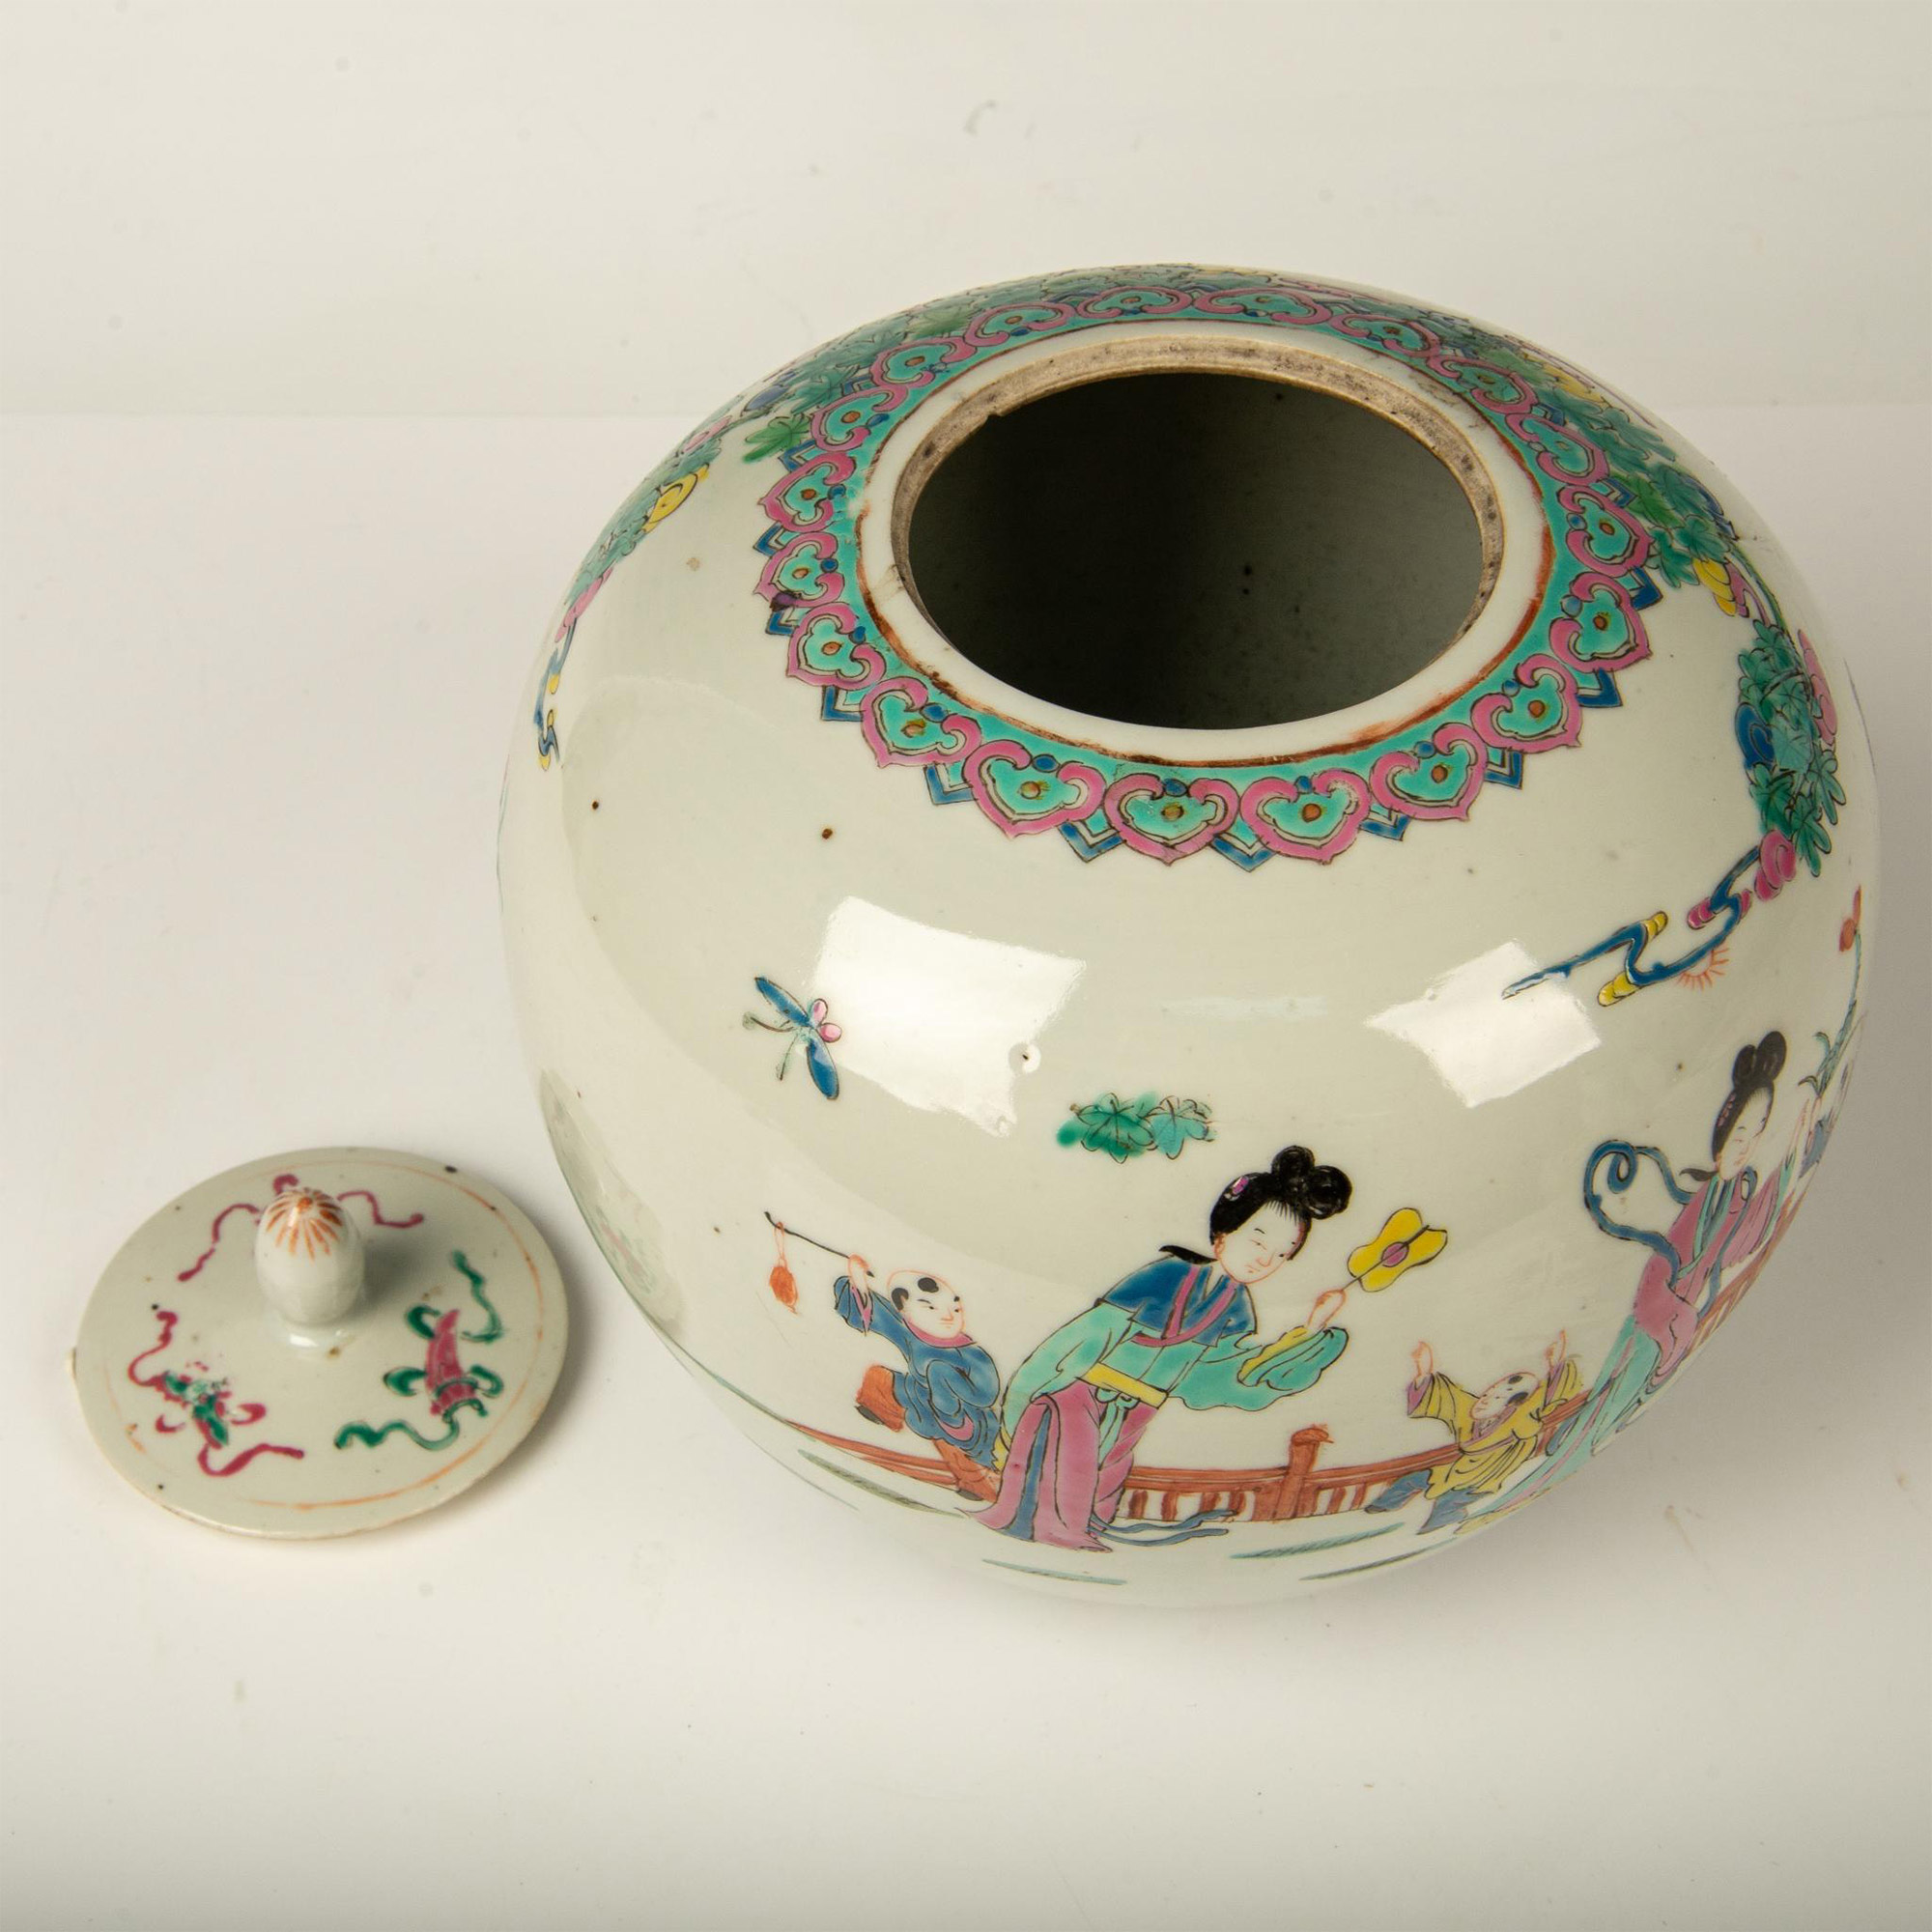 Antique Chinese Porcelain Covered Ginger Pot - Image 5 of 6